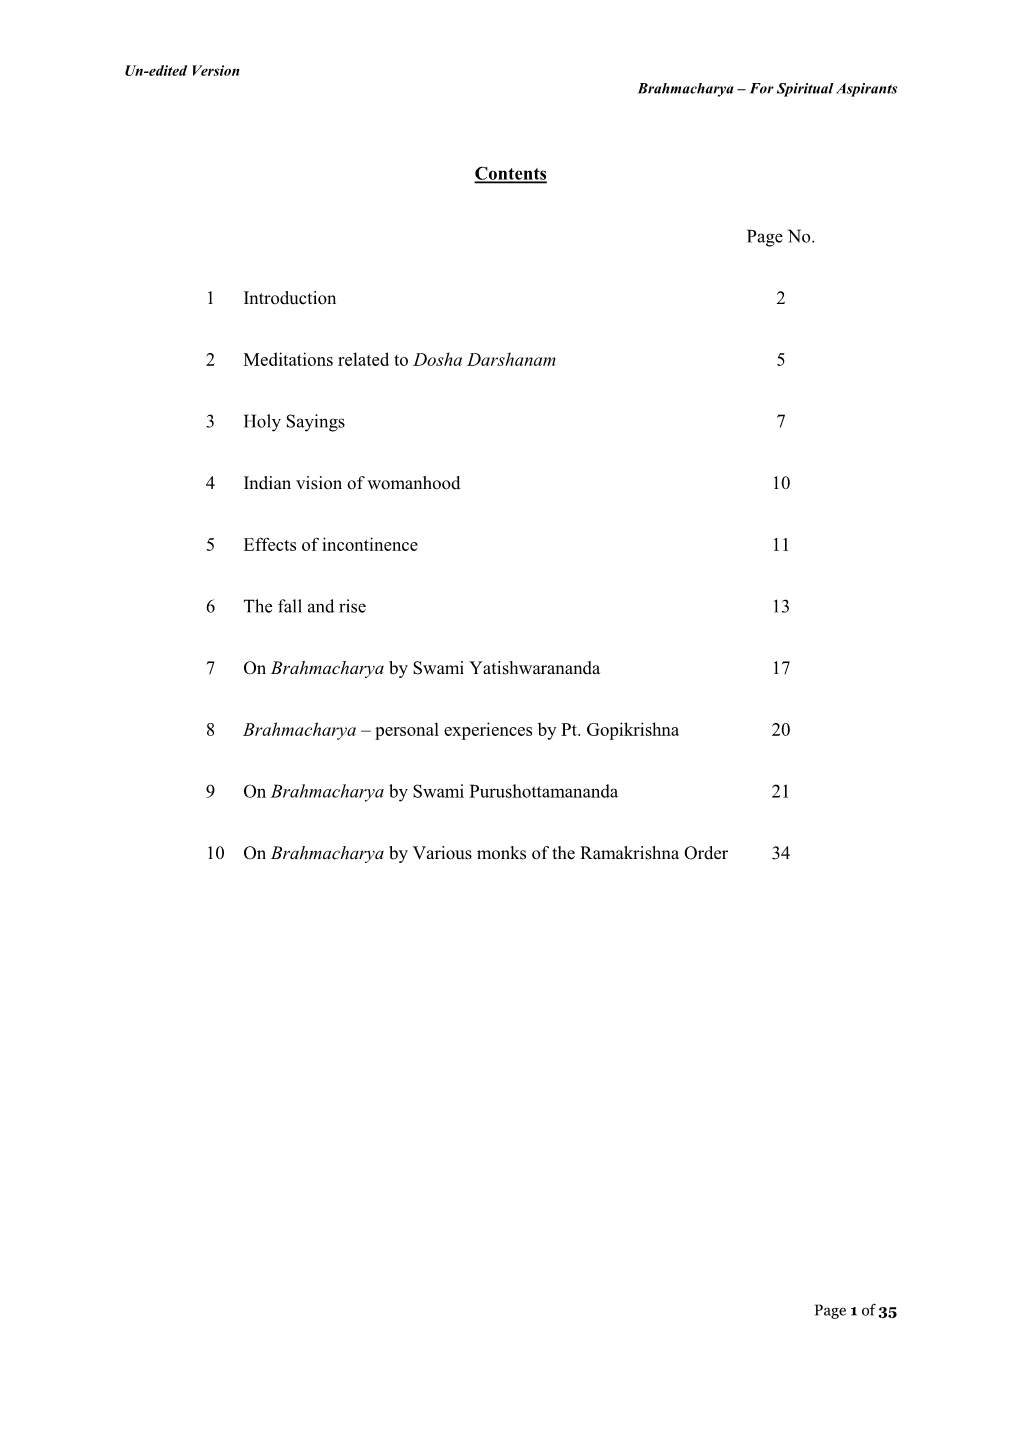 Contents Page No. 1 Introduction 2 2 Meditations Related to Dosha